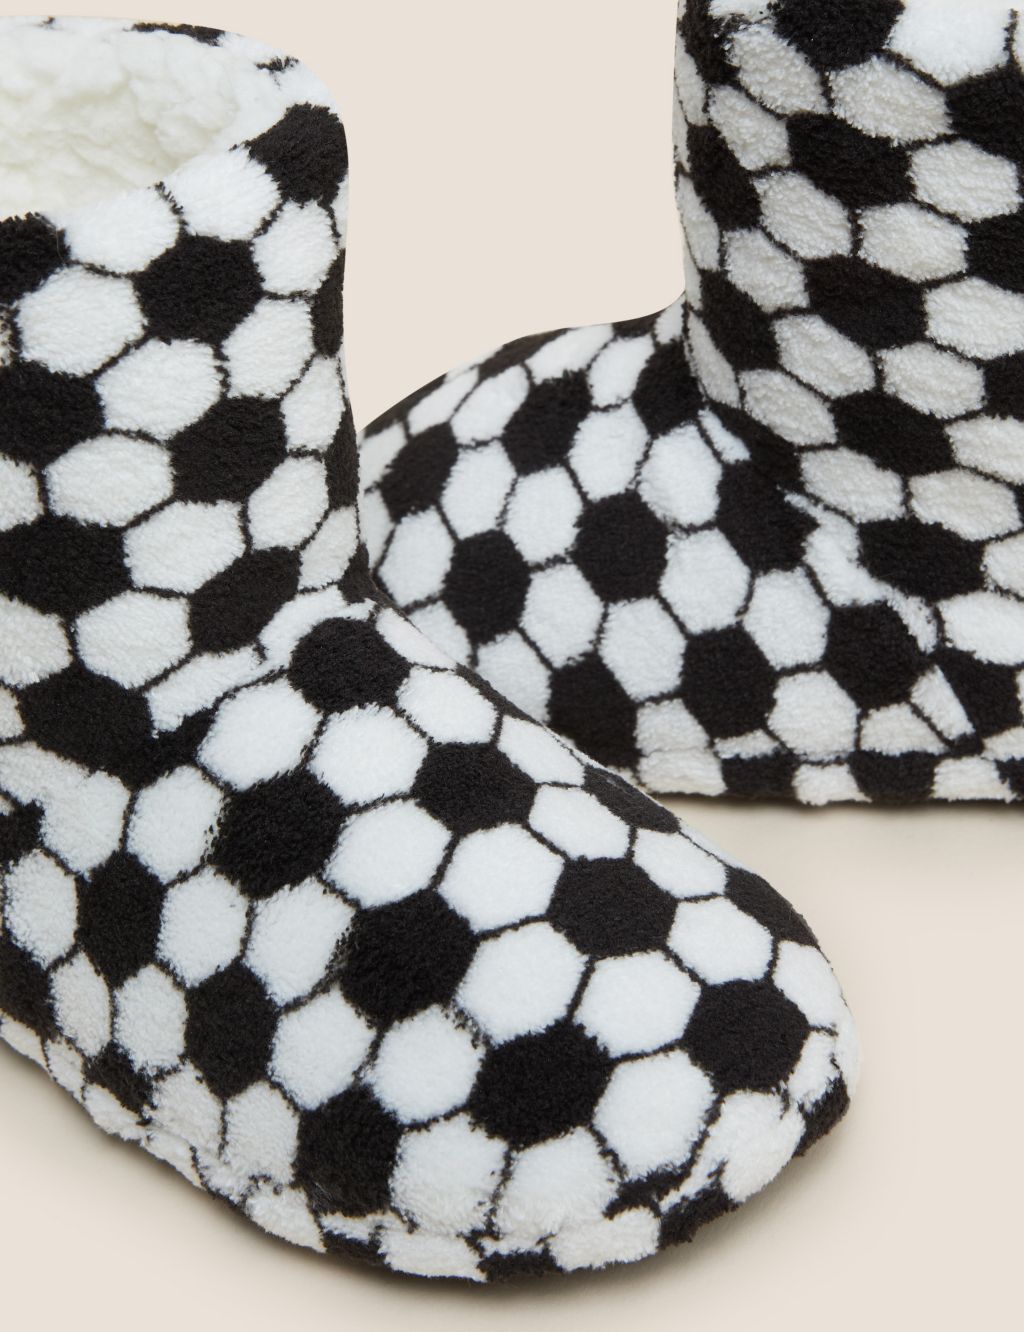 Football Slipper Boots (4 Small - 7 Large) image 2